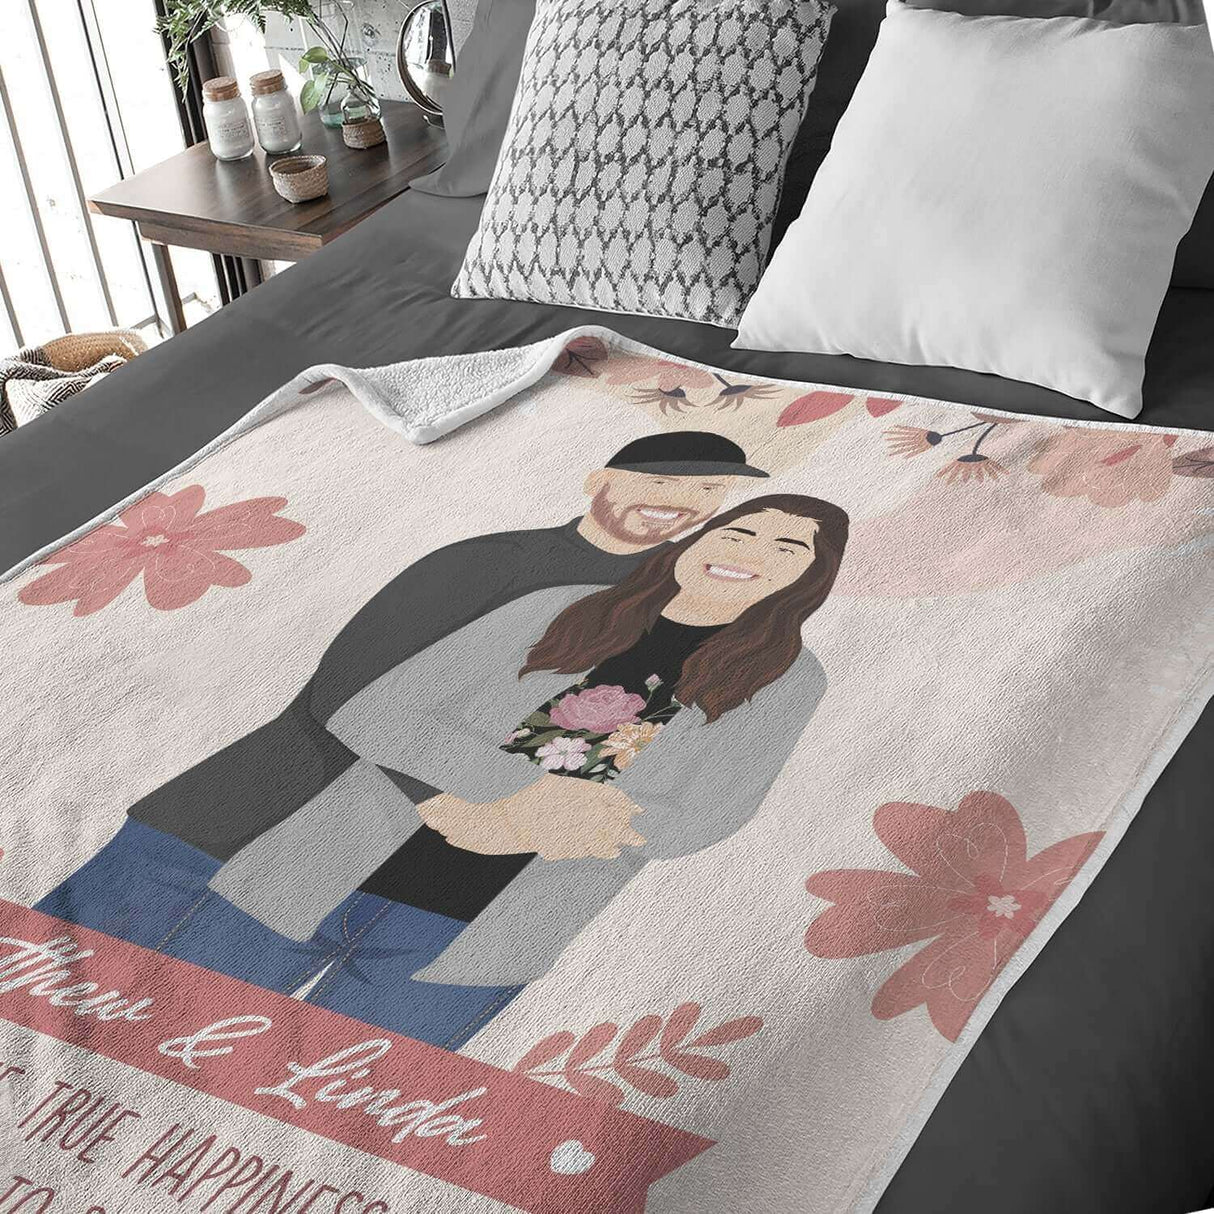 Personalized Couples Blanket with Pictures